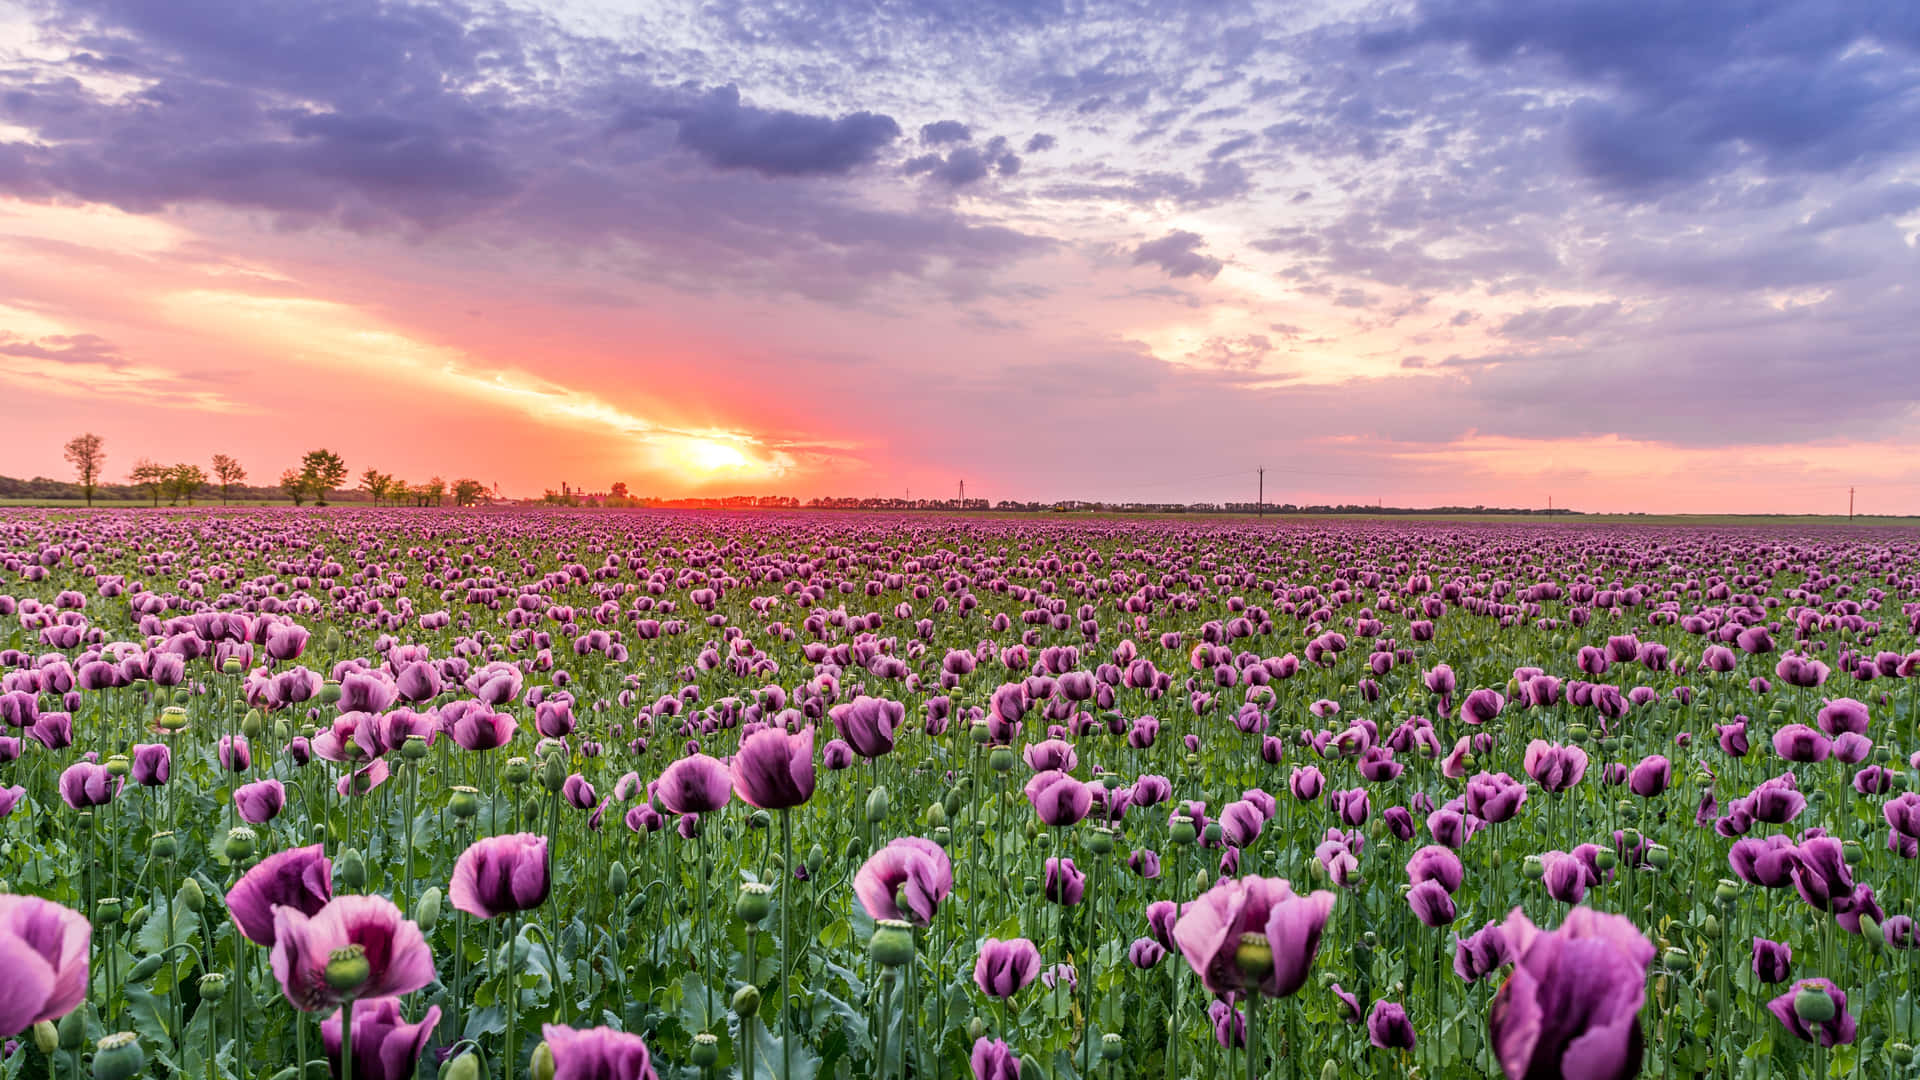 A Field Of Purple Tulips At Sunset